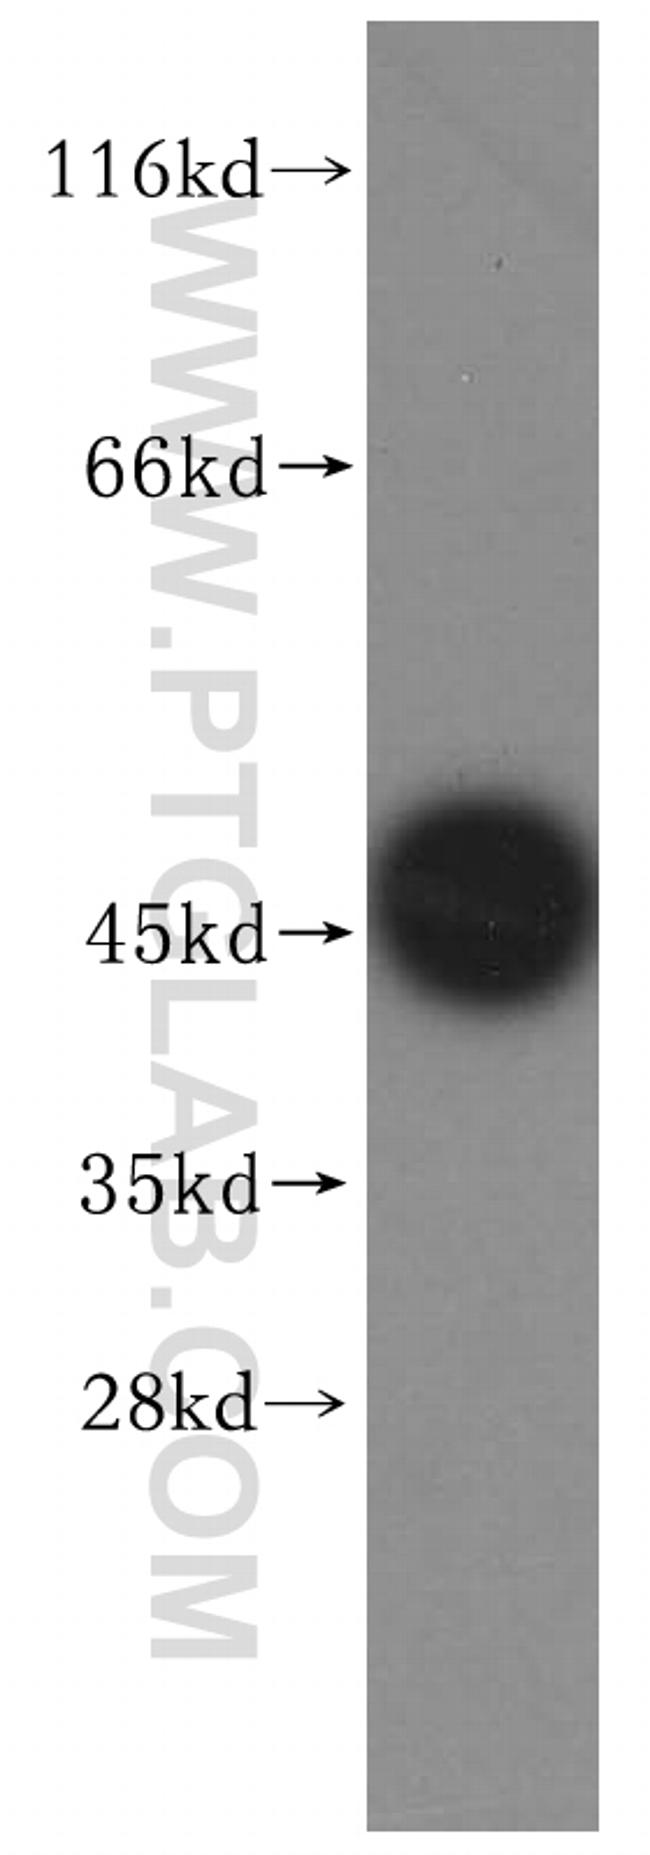 Carboxypeptidase A2 Antibody in Western Blot (WB)